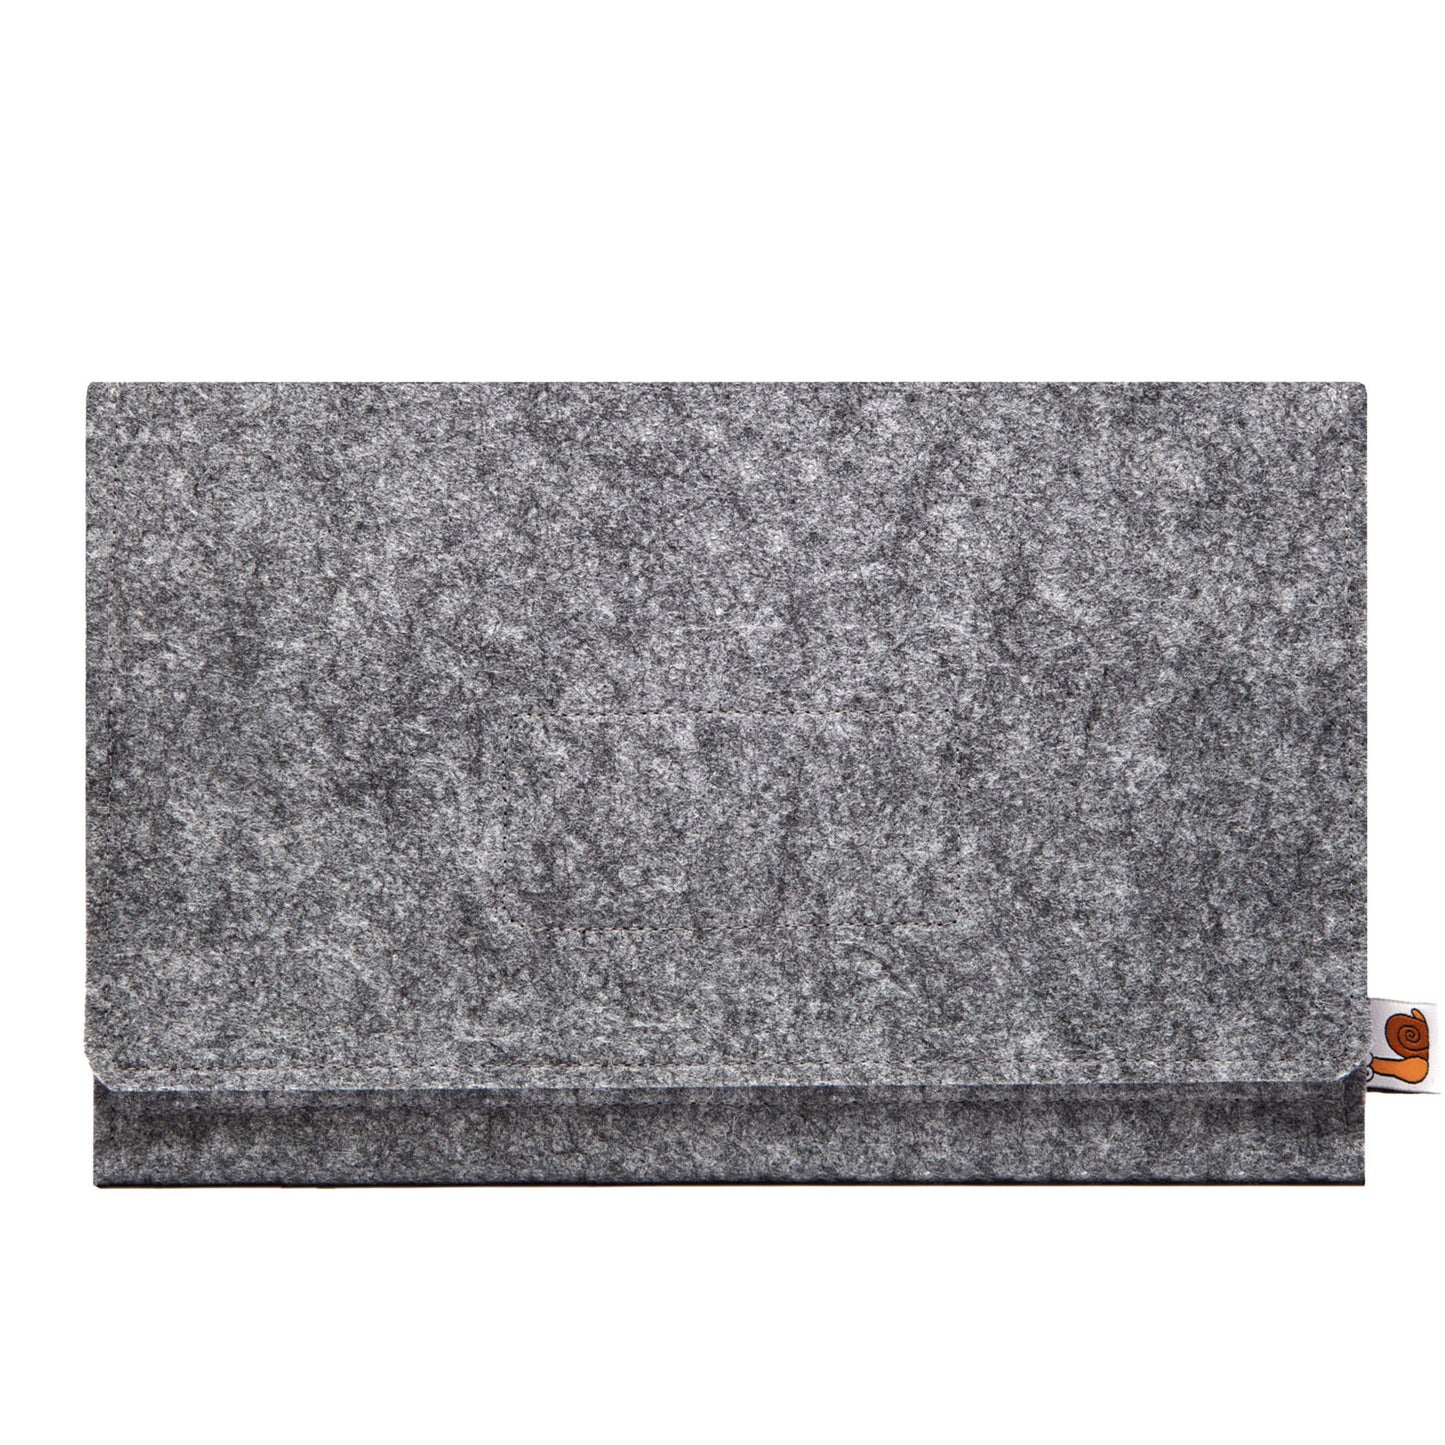 Premium Felt iPad Cover: Ultimate Protection with Accessories Pocket - Grey & Green